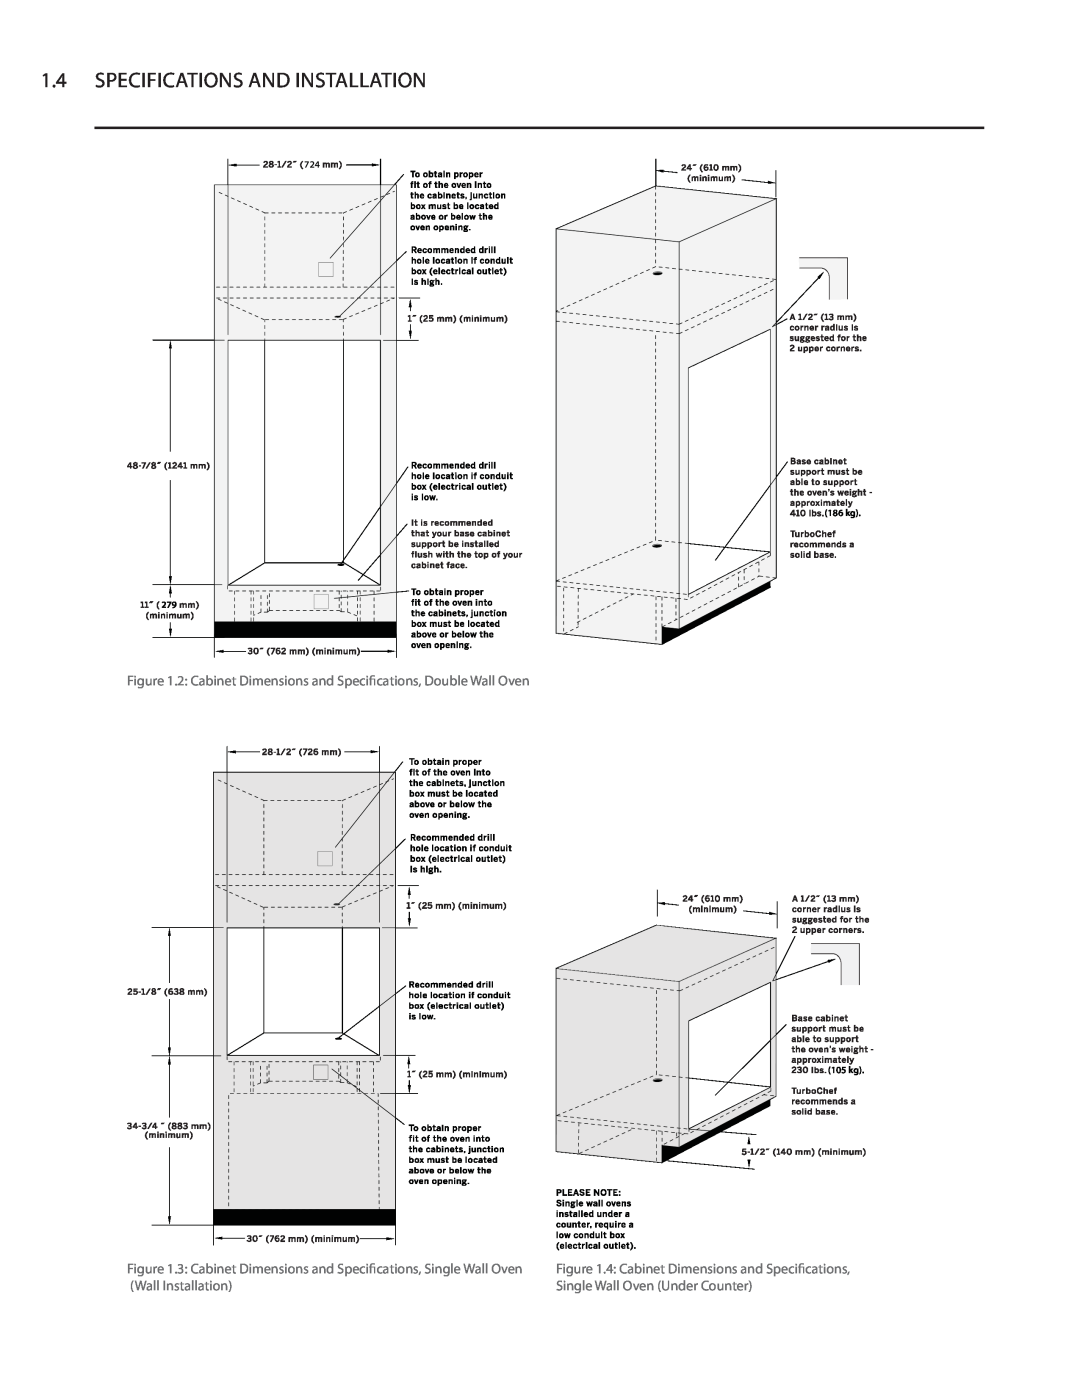 Turbo Chef Technologies Residential Single and Double Wall Oven Specifications And Installation, Wall Installation, 186 kg 